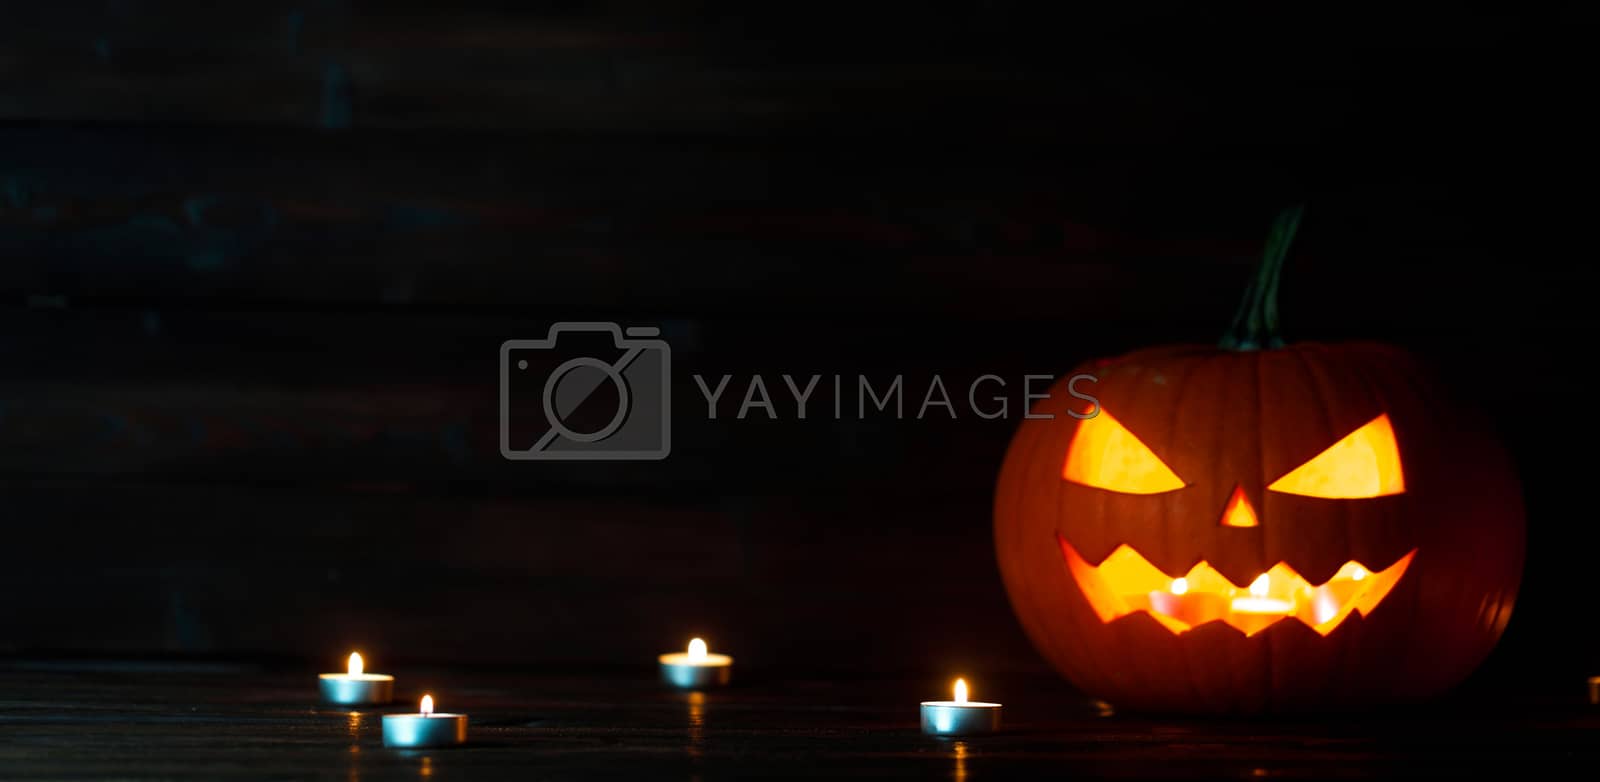 Royalty free image of Halloween pumpkin and candles by Yellowj